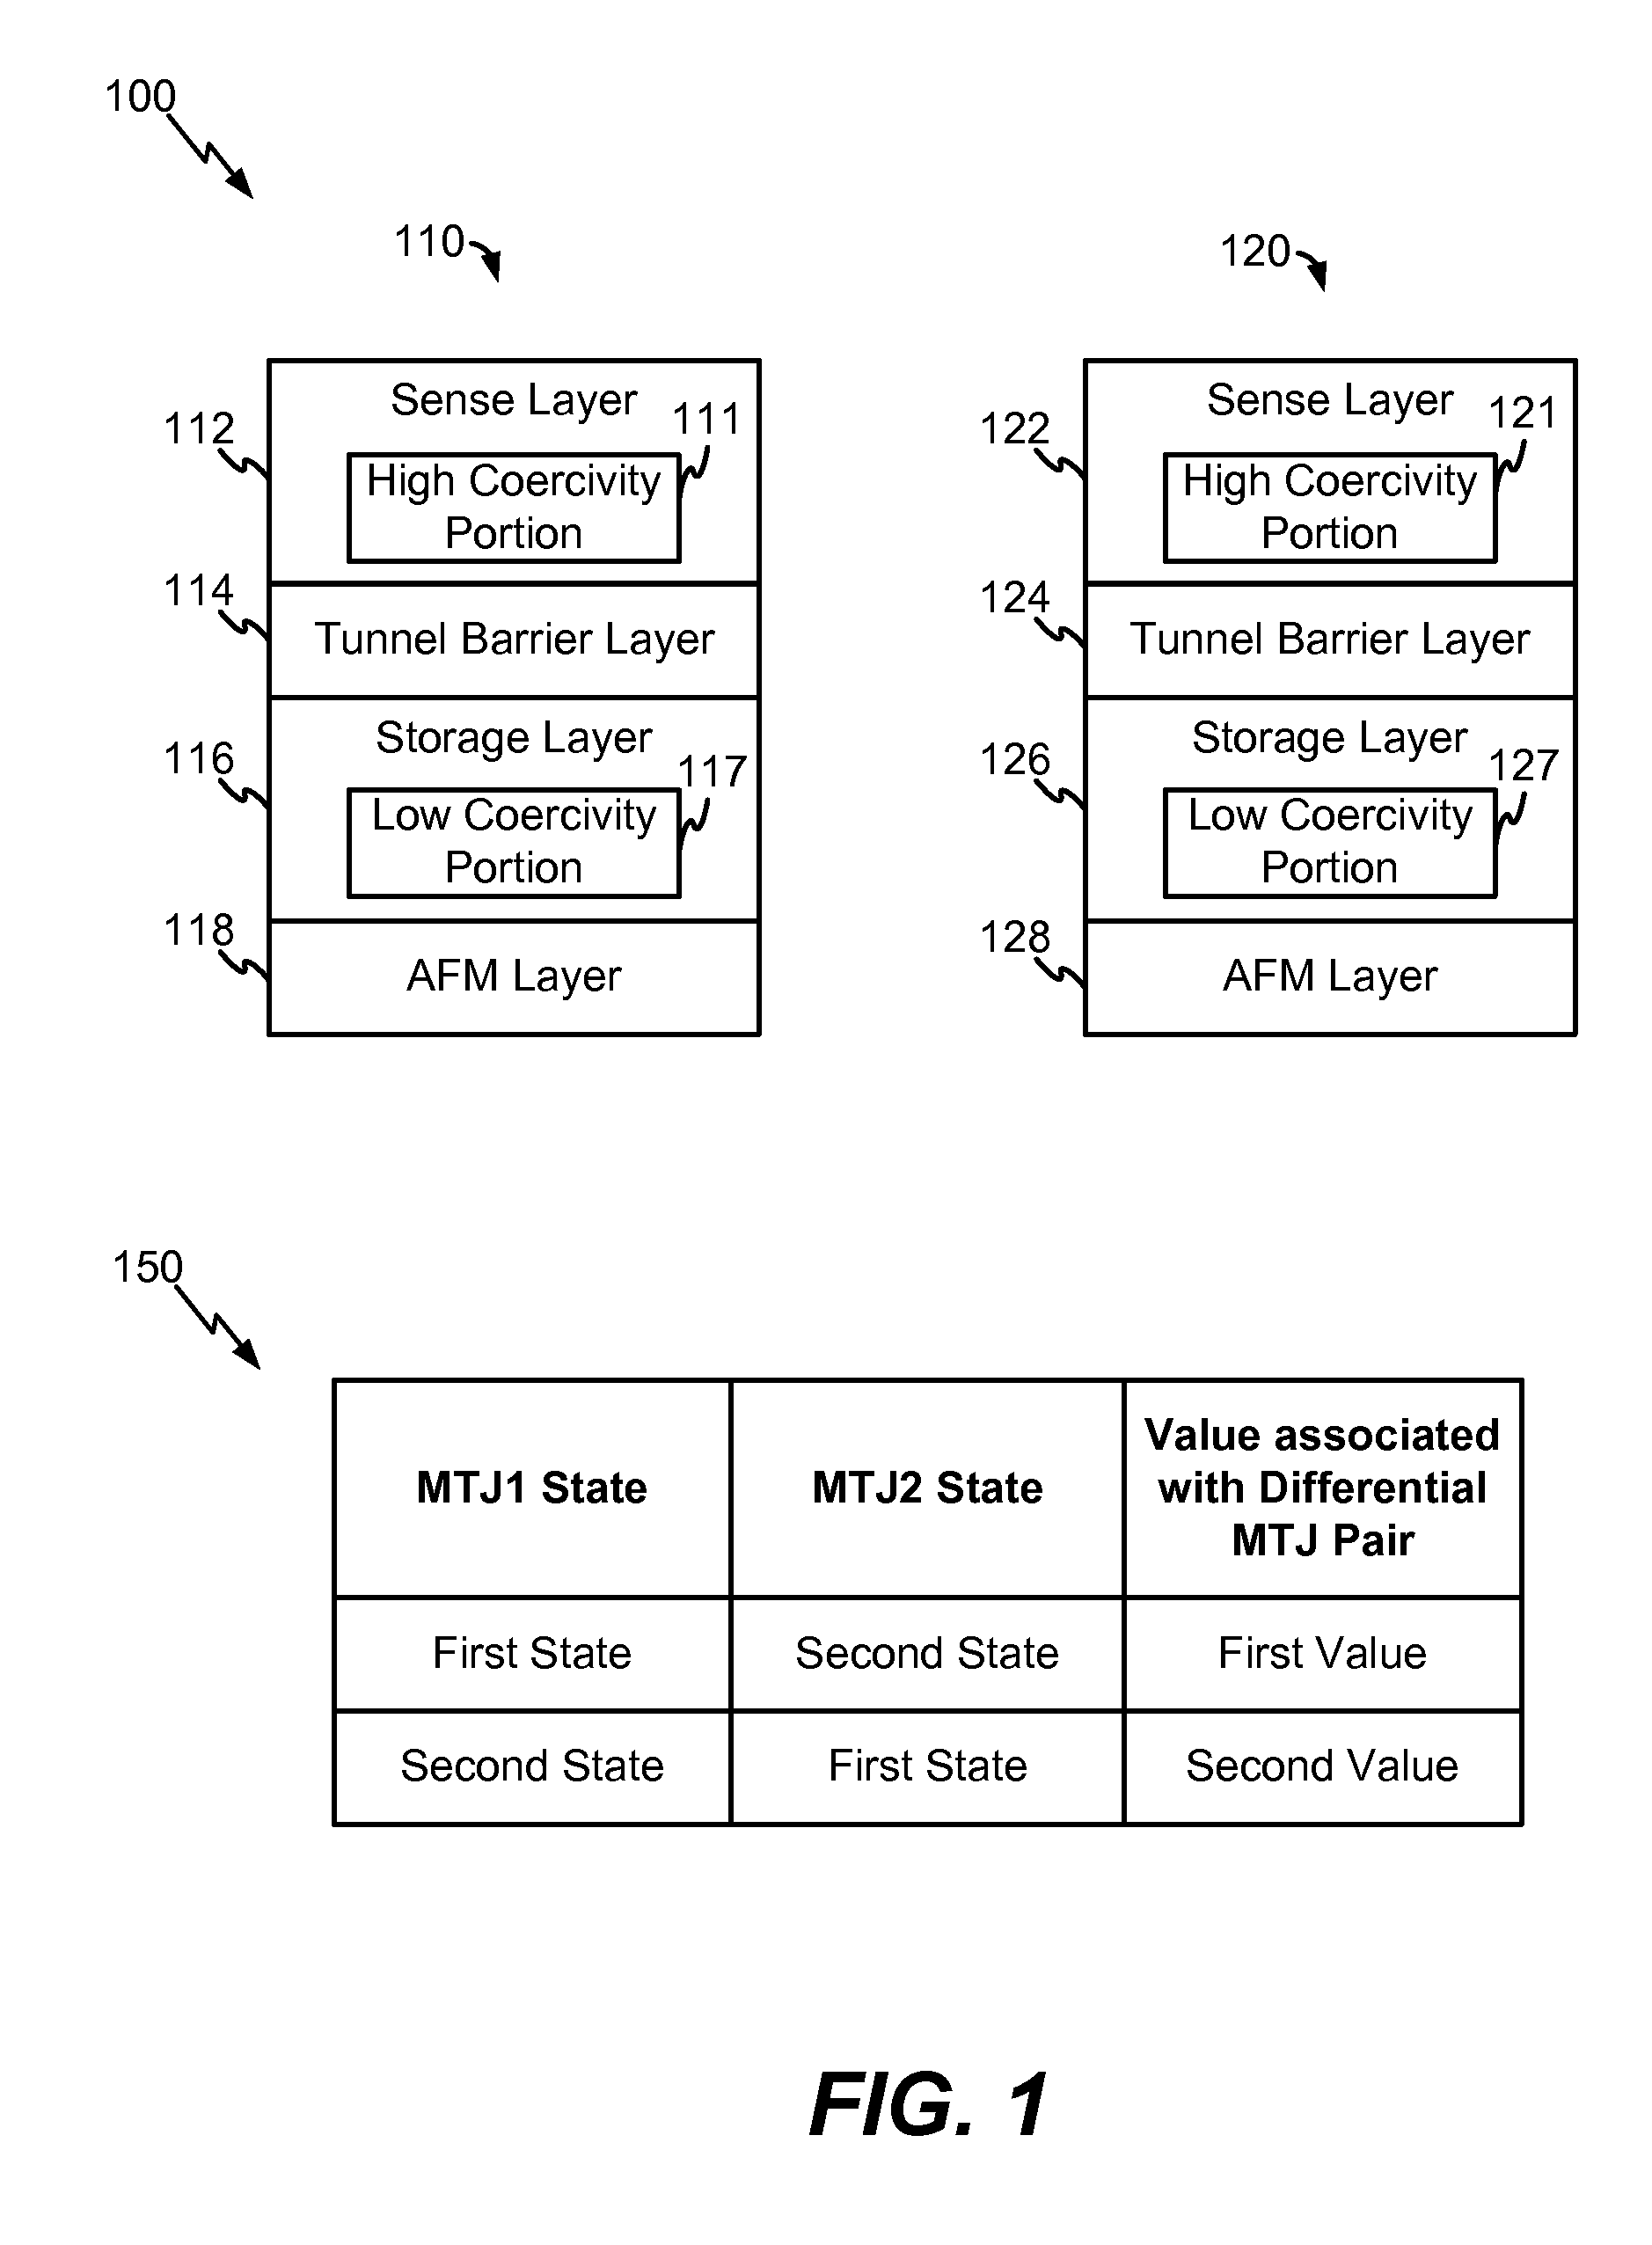 Differential magnetic tunnel junction pair including a sense layer with a high coercivity portion